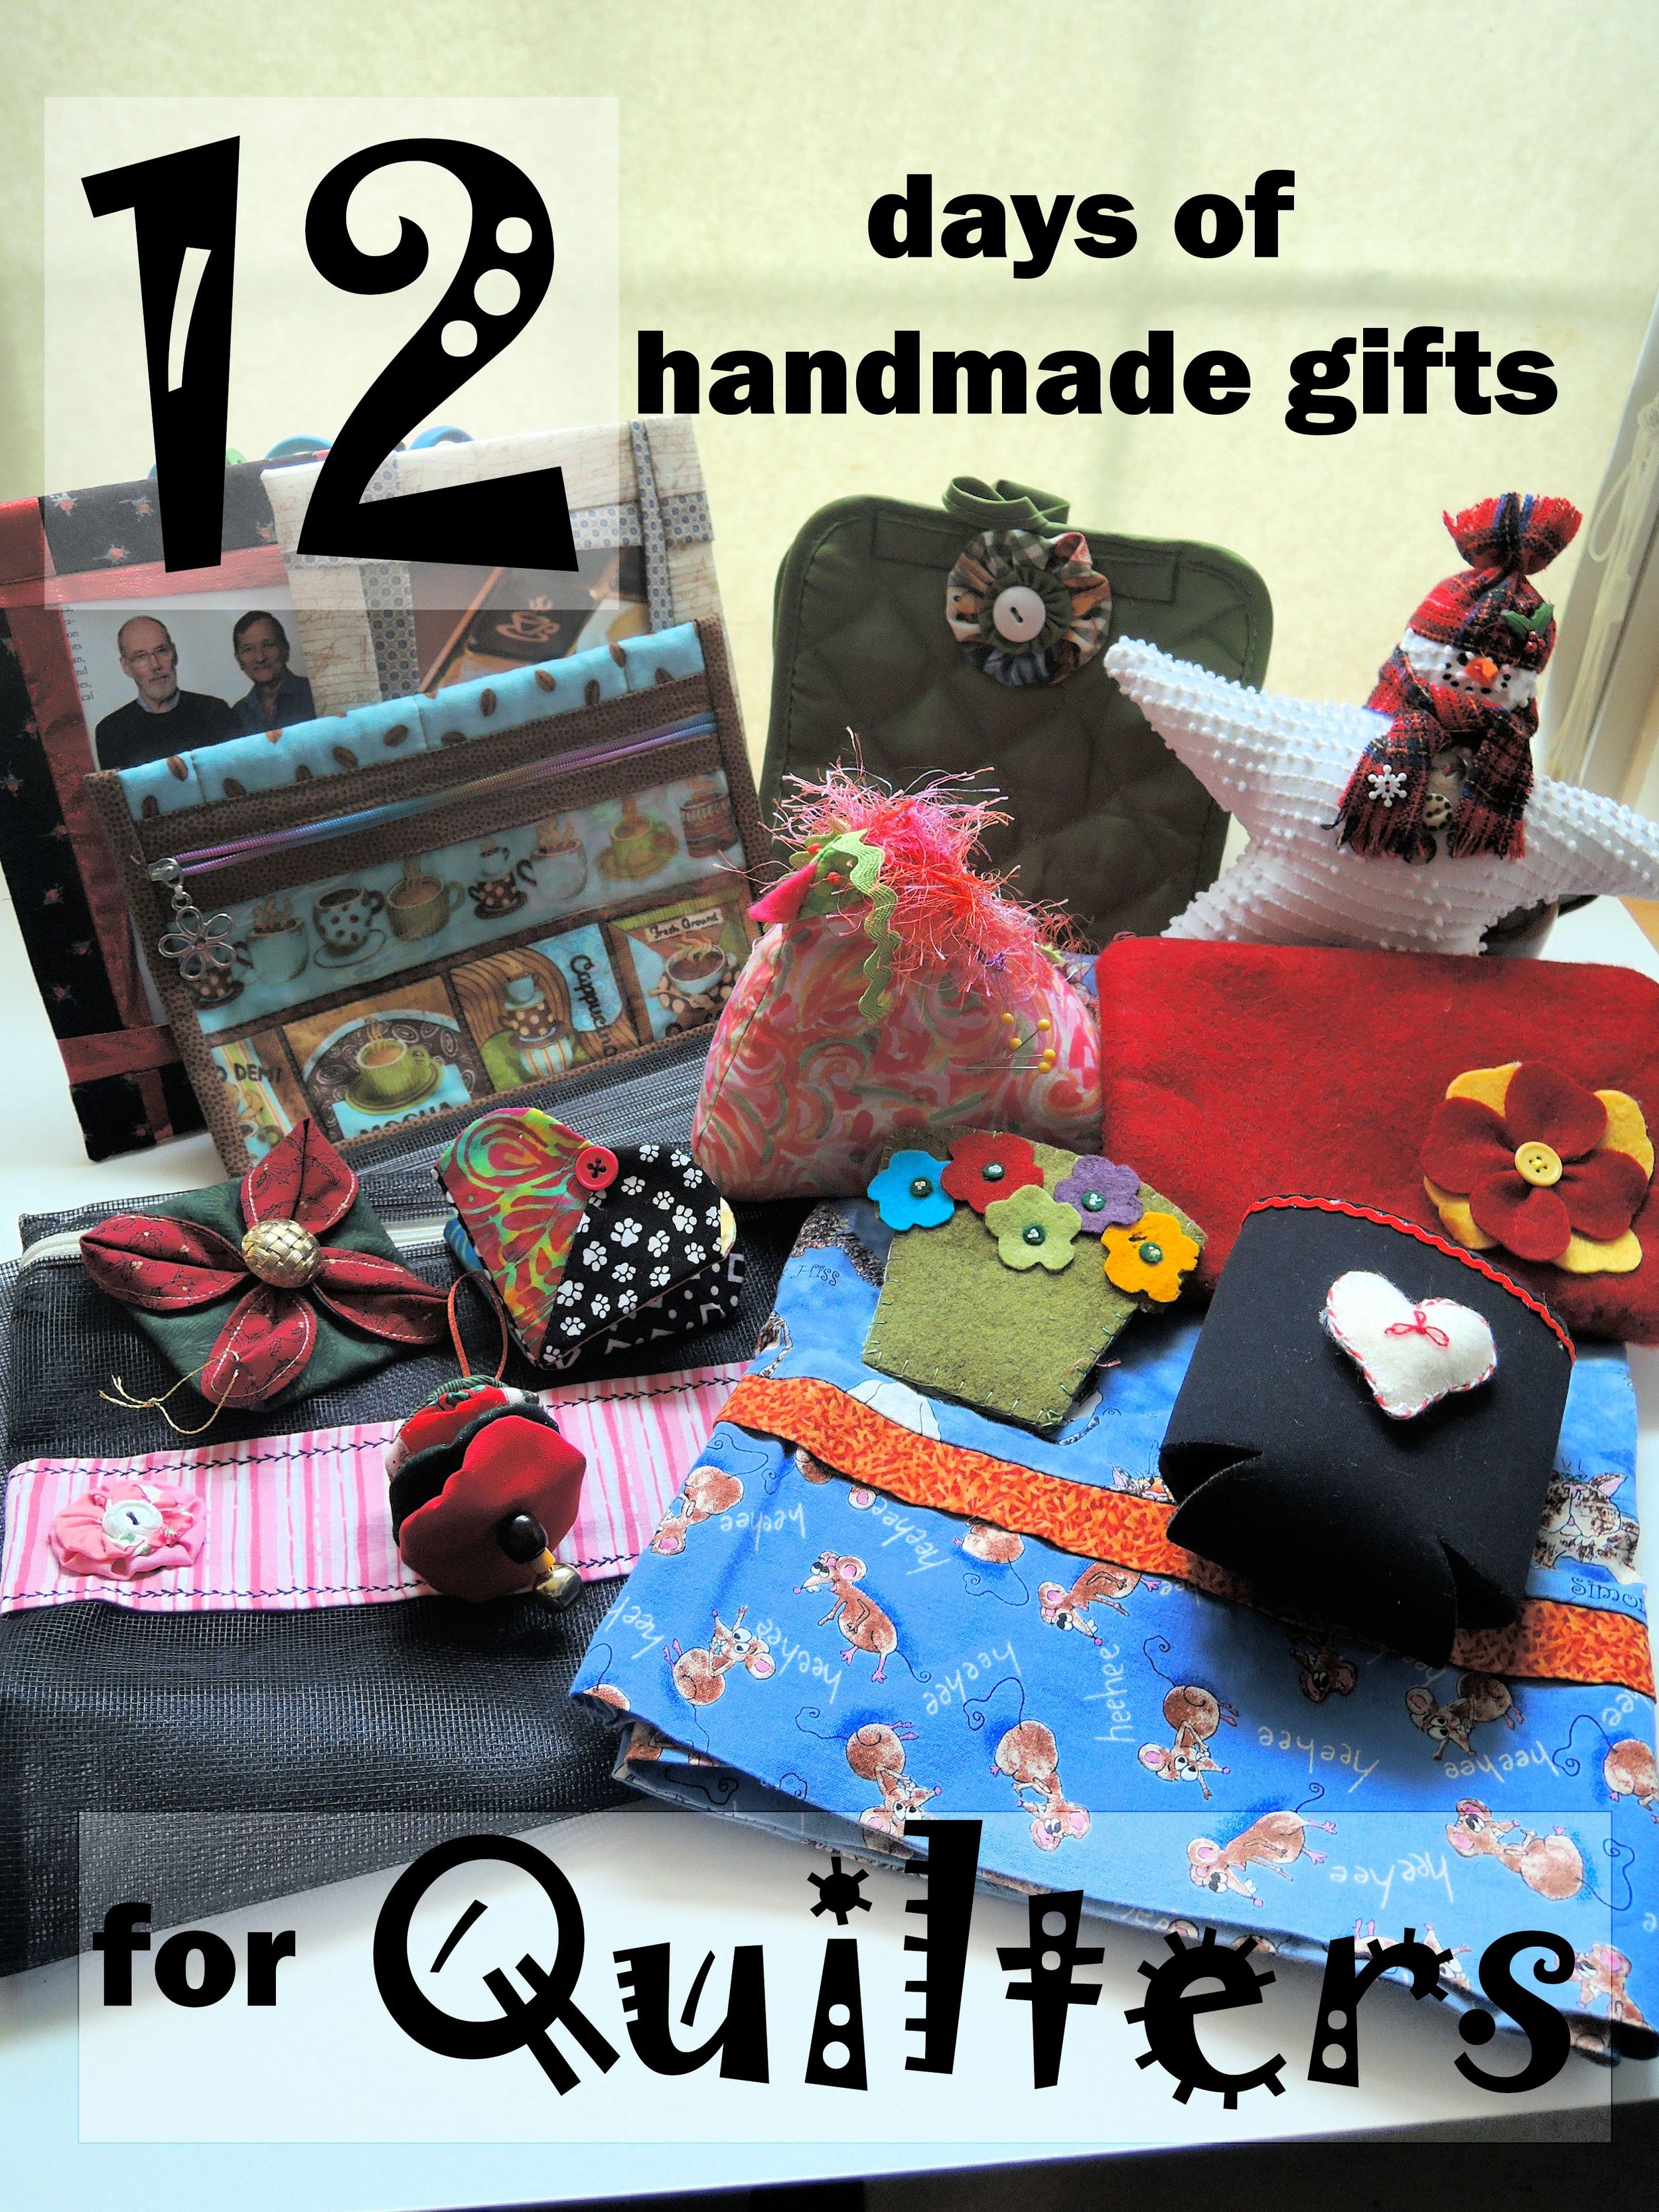 12 Days of Handmade Gifts for Quilters — The Inquiring Quilter